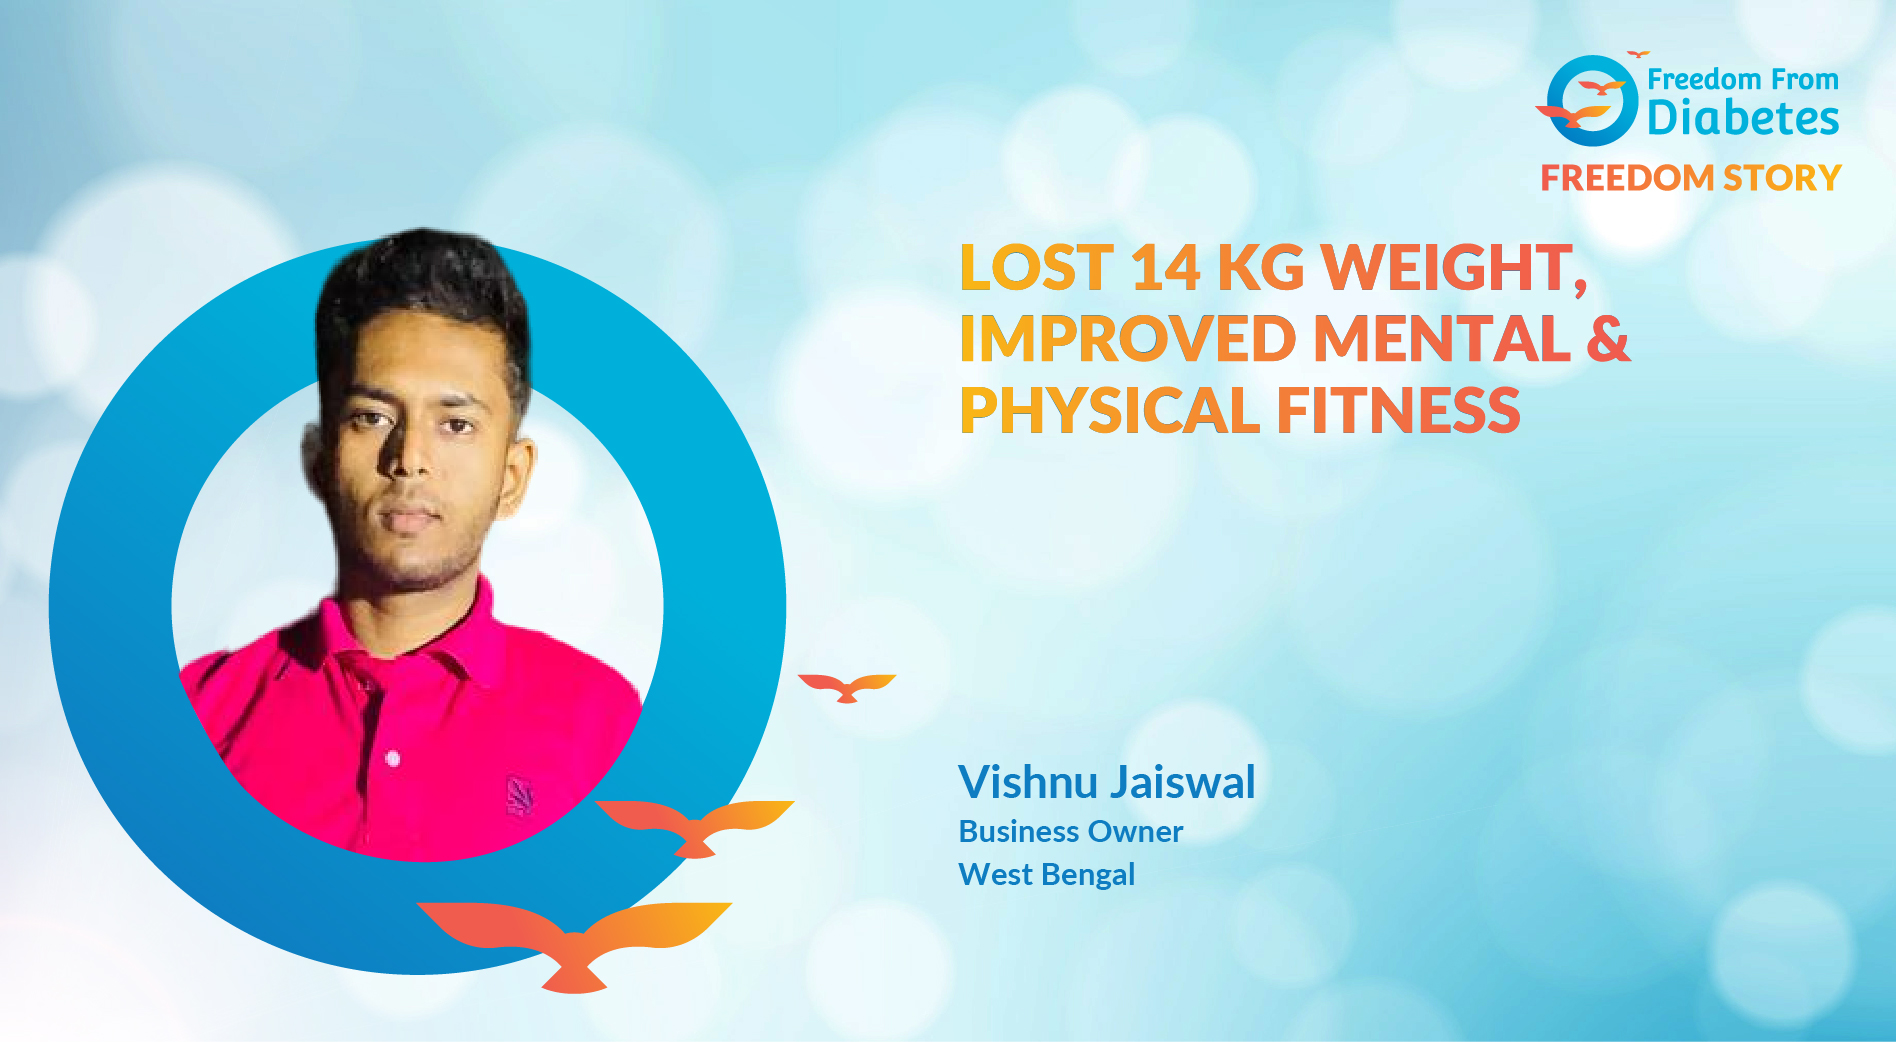 Vishnu Jaiswal: A motivational weight loss story from West Bengal